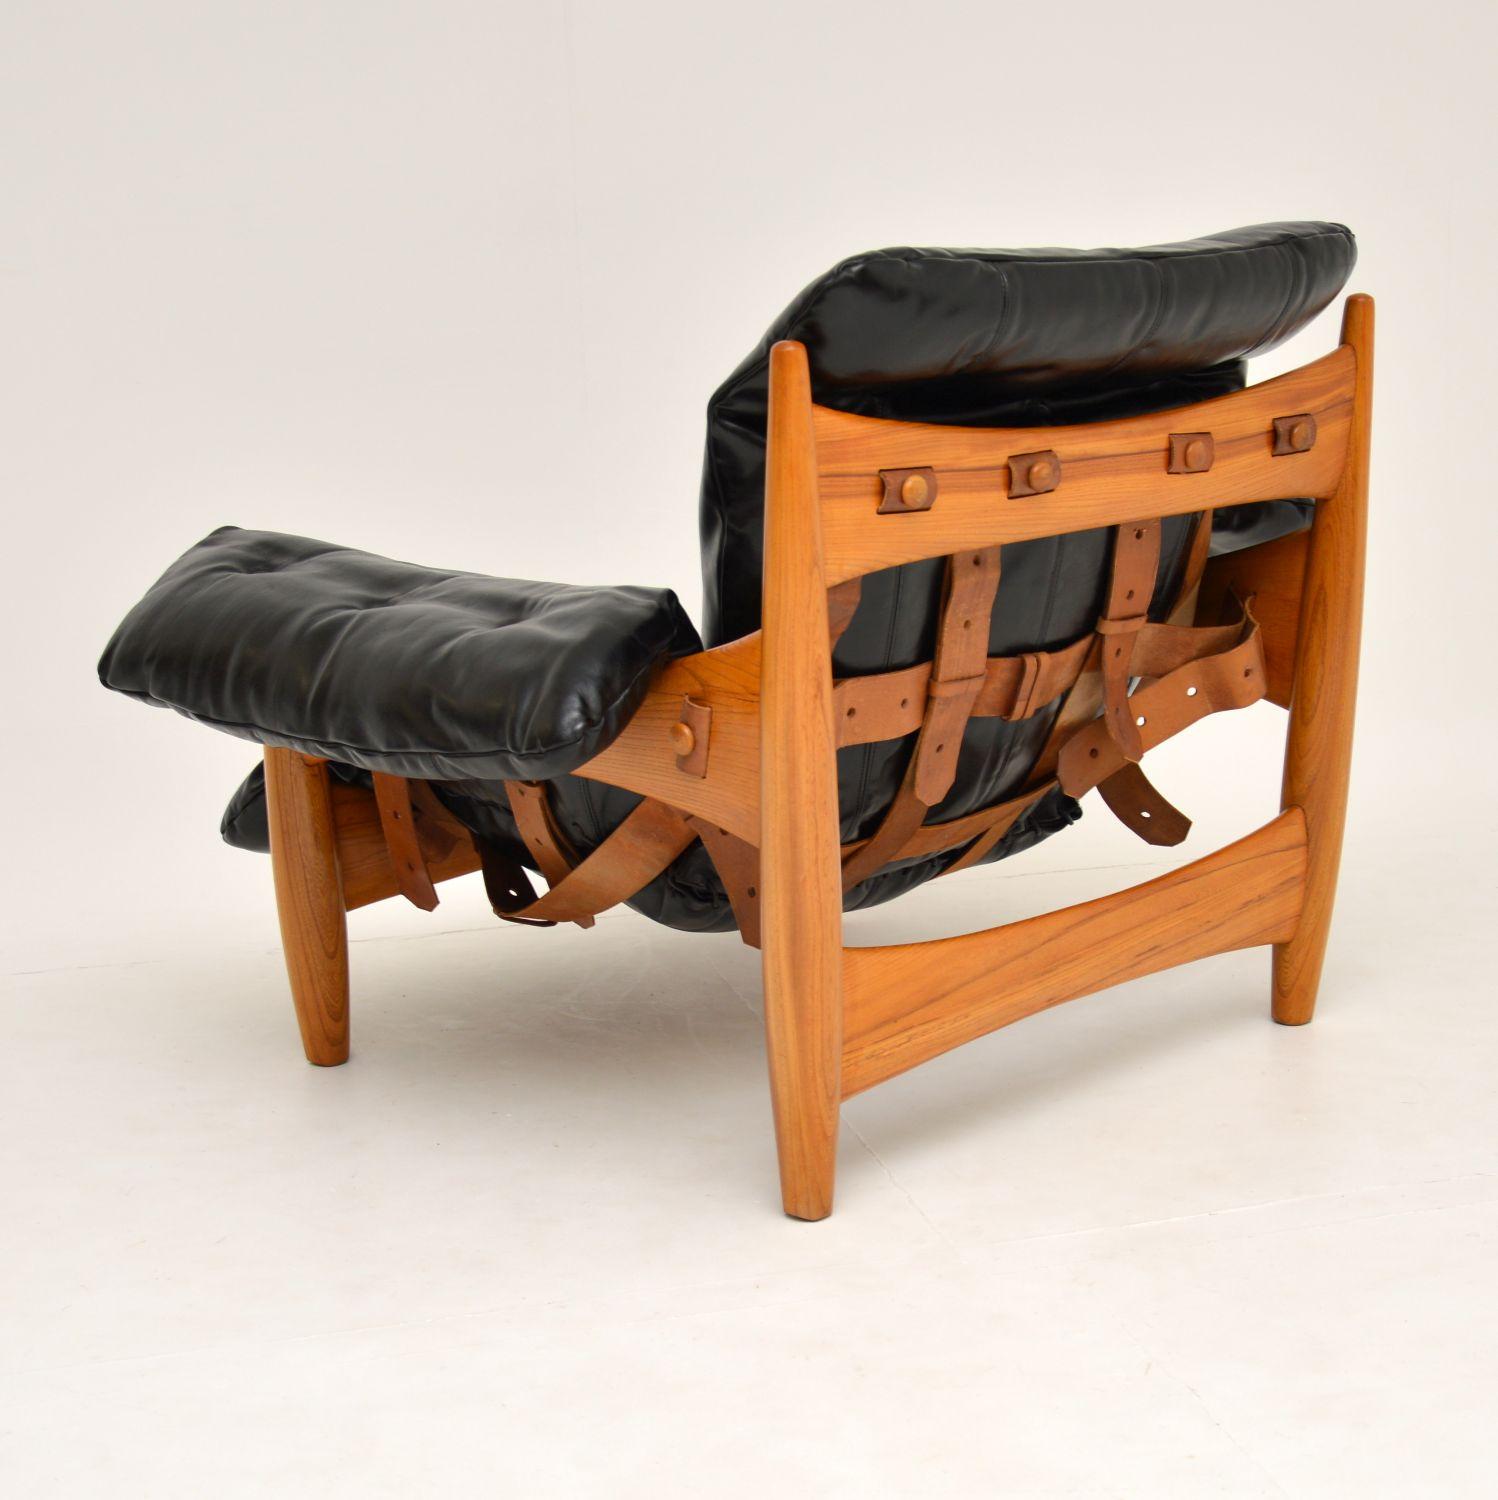 Brazilian Vintage “Sheriff” Leather Armchair by Sergio Rodrigues for ISA